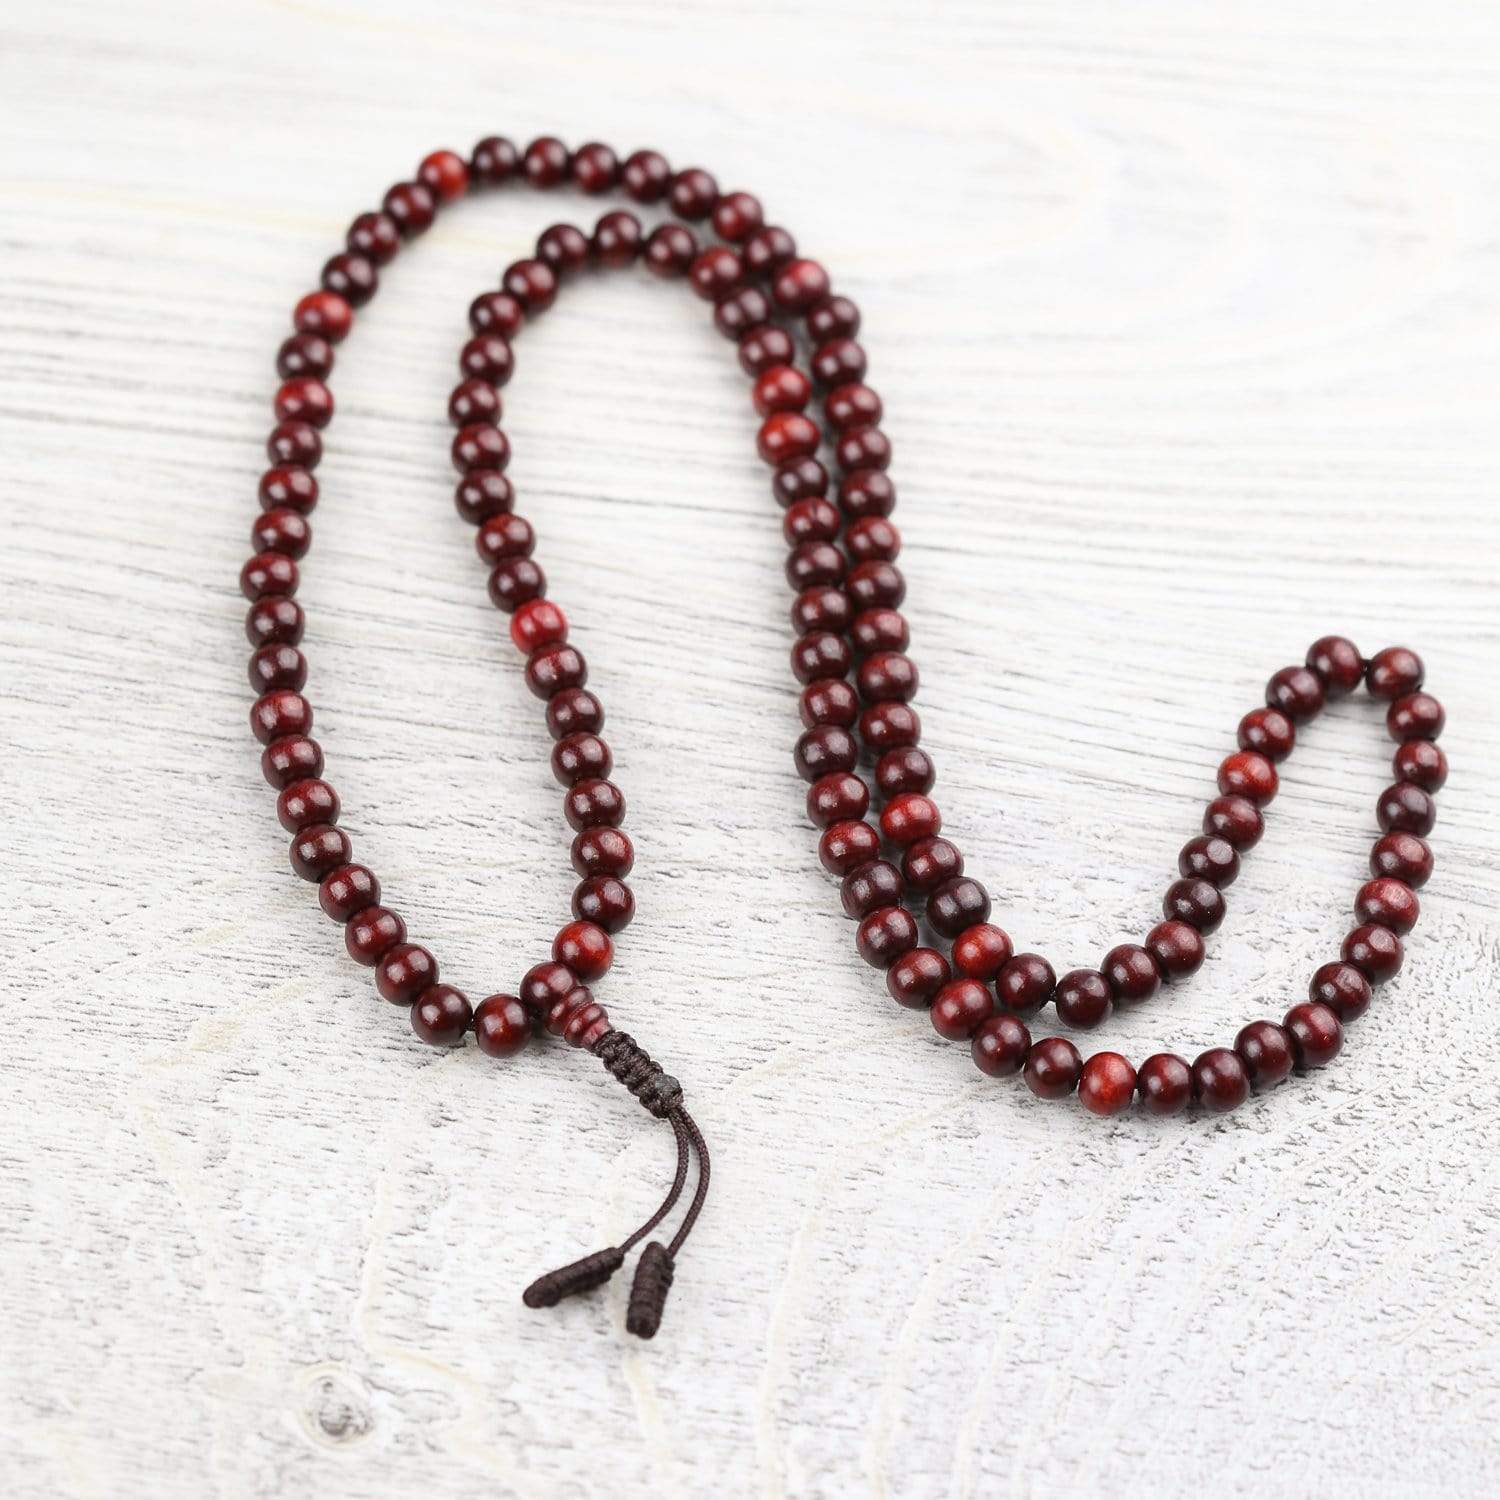 Japanese Antique Rosewood Mala Prayer Bead String 800 Beads With